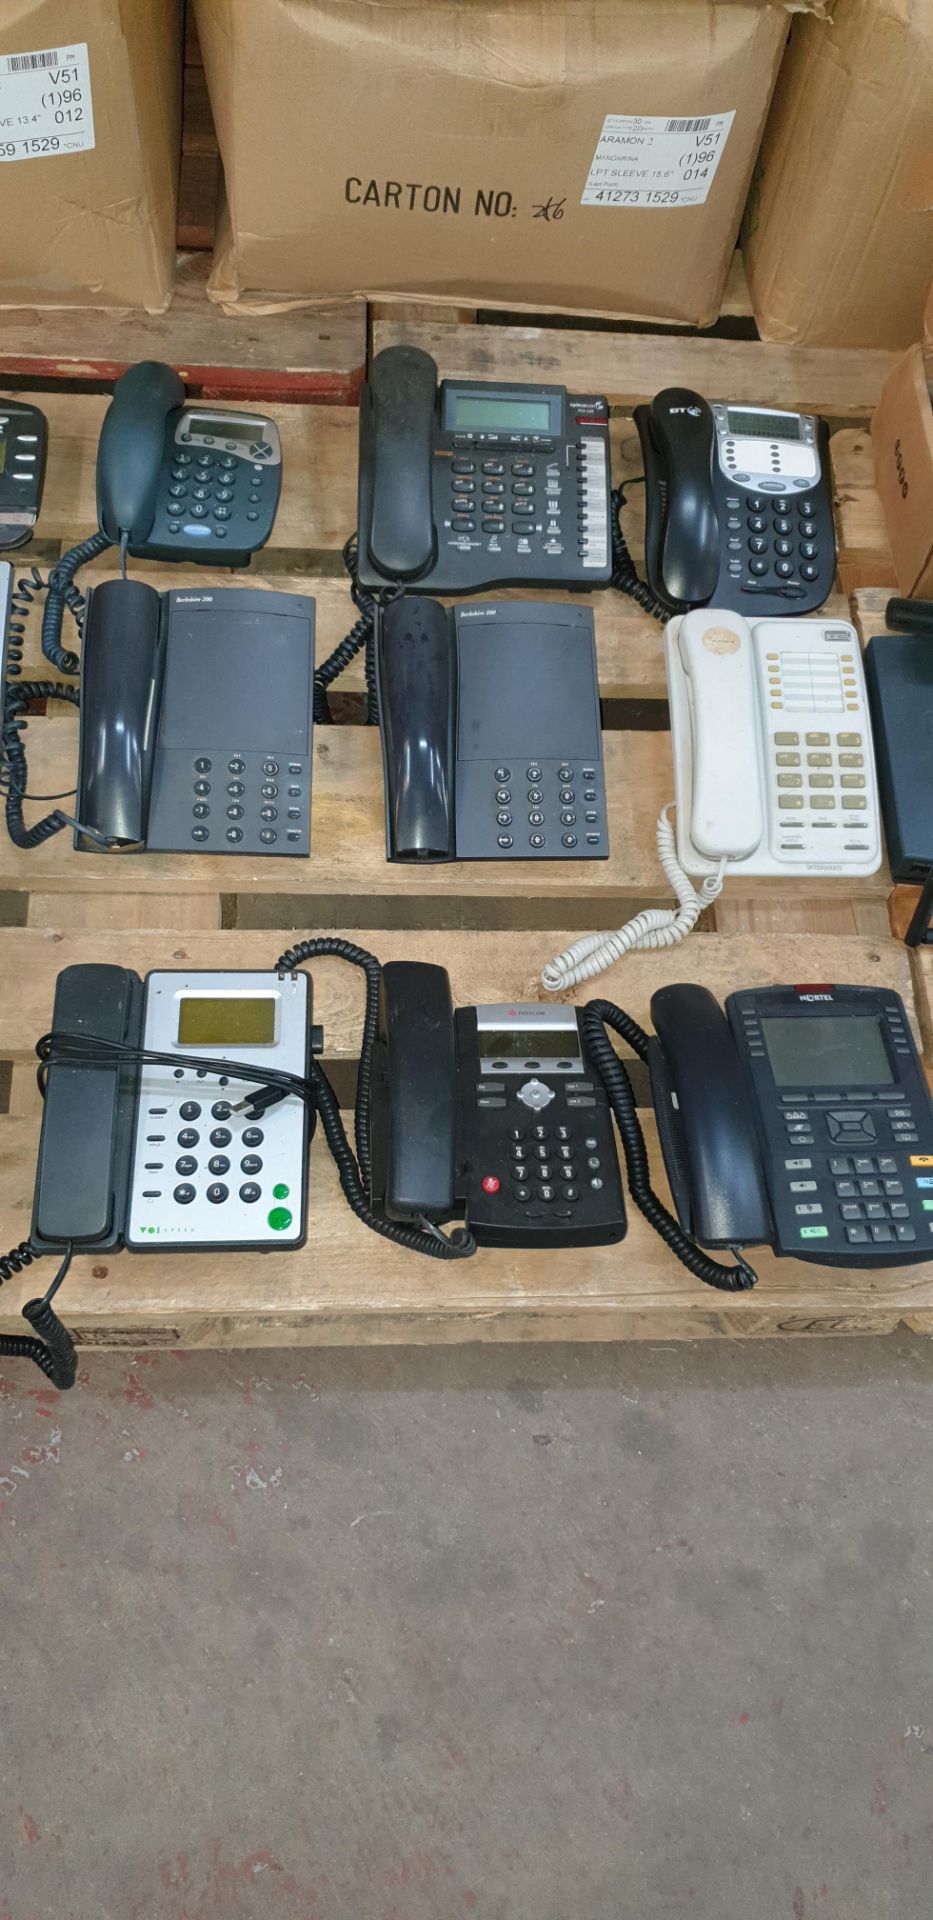 16 off assorted telephone handsets by Polycom, Cisco, Splicecom, Nortel & others - Image 3 of 8